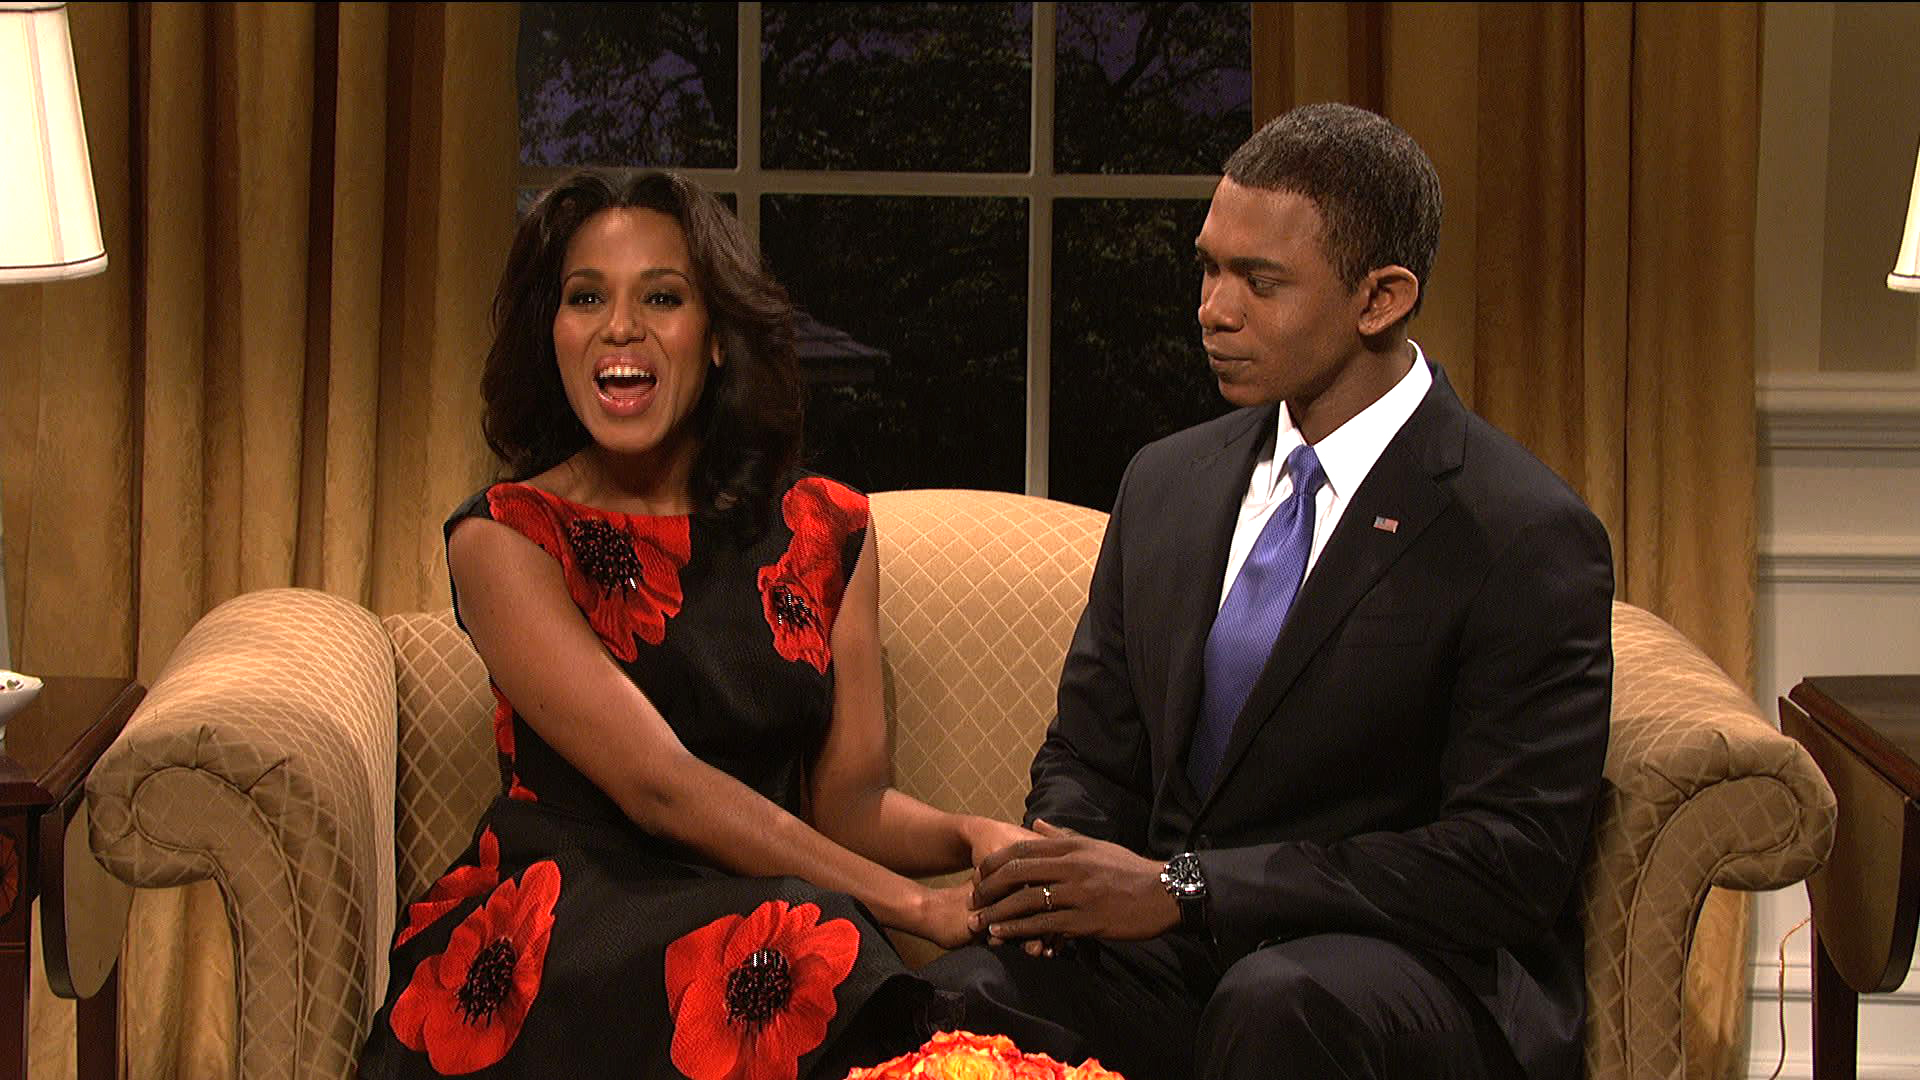 Watch Black Women on SNL and in the White House From Saturday Night Live - NBC.com